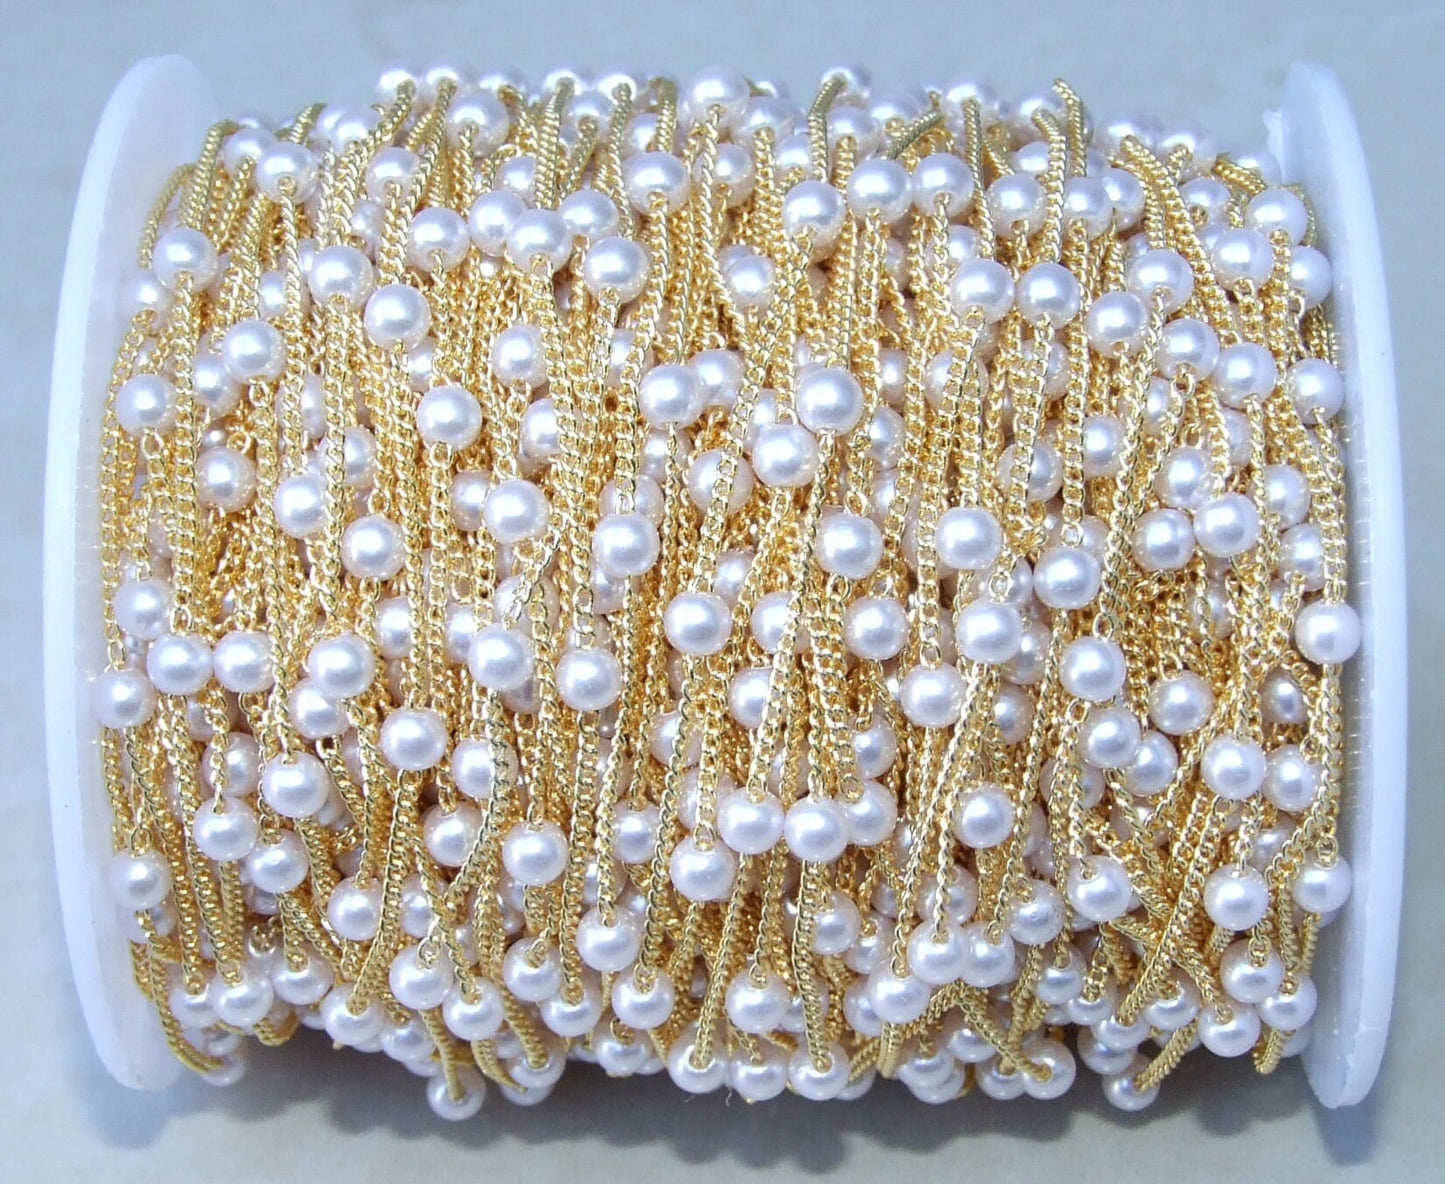 Gold Chain, Oval Link Glass Pearl Cable Chain, Jewelry Chain, Necklace Chain, Body Chain, Bulk Chain, Sold by the Meter, 1.25mm x .85mm